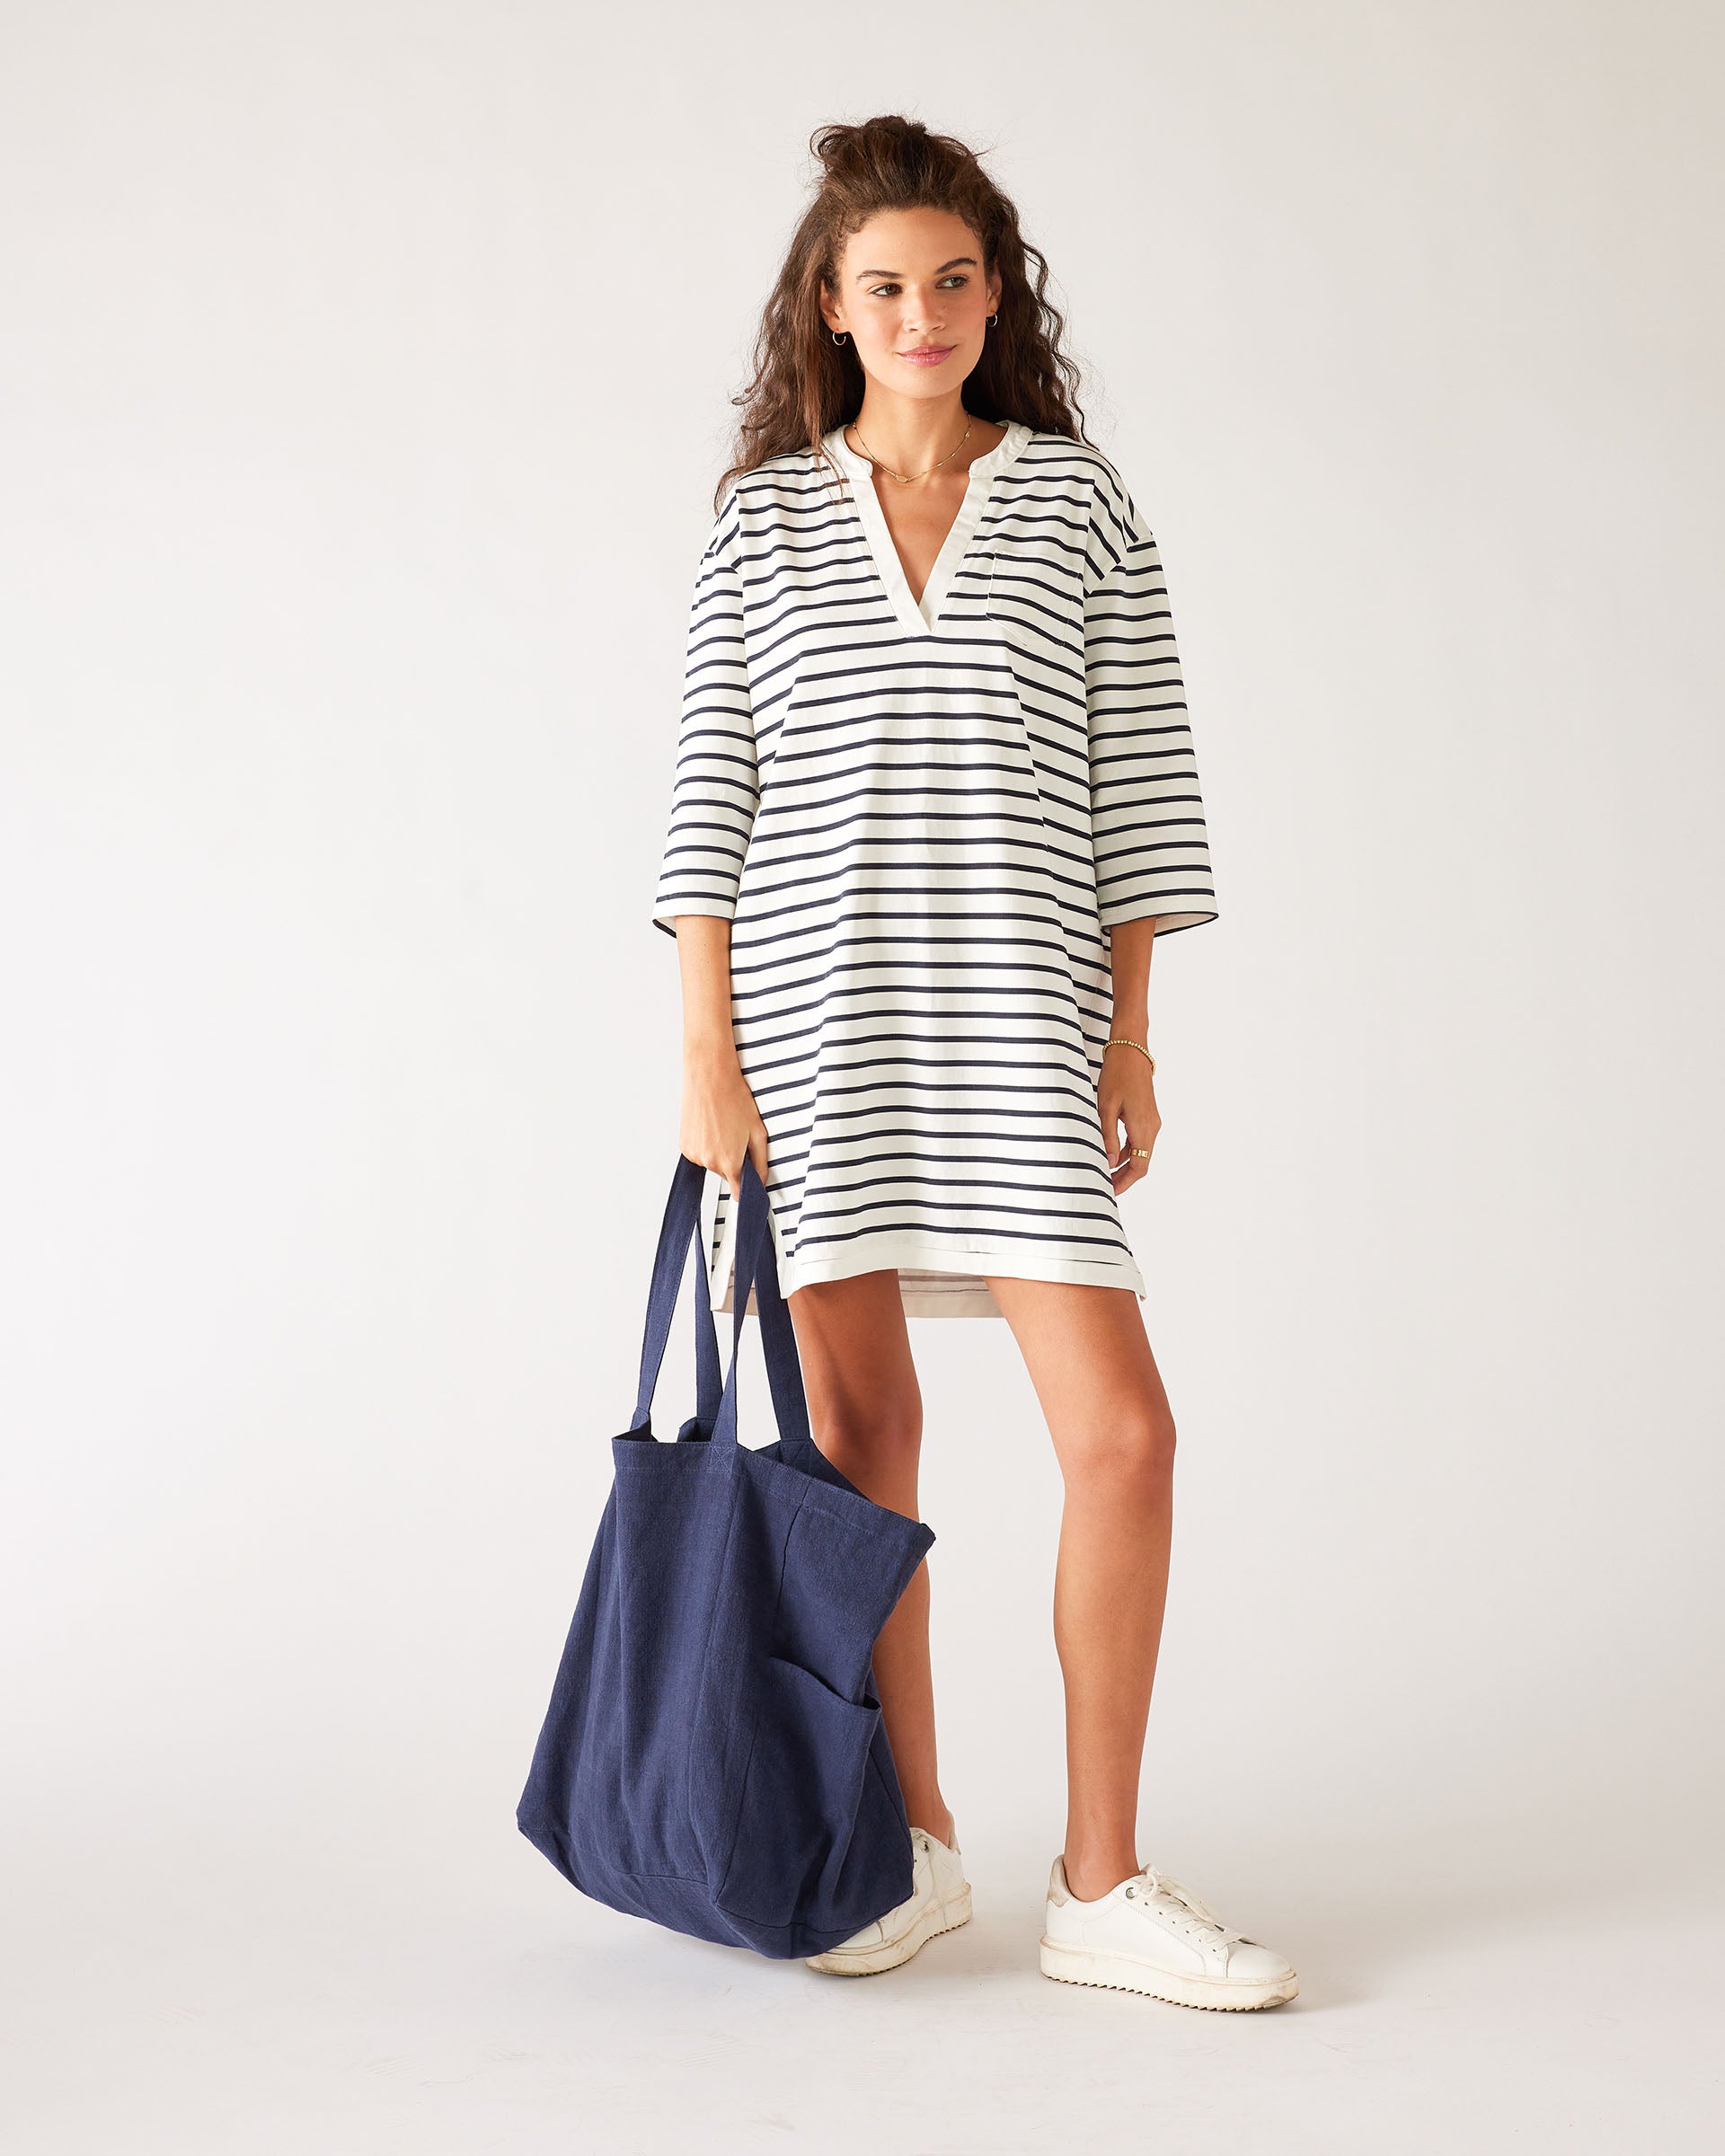 woman in striped dress carrying mersea oversized canvas tote in navy blue